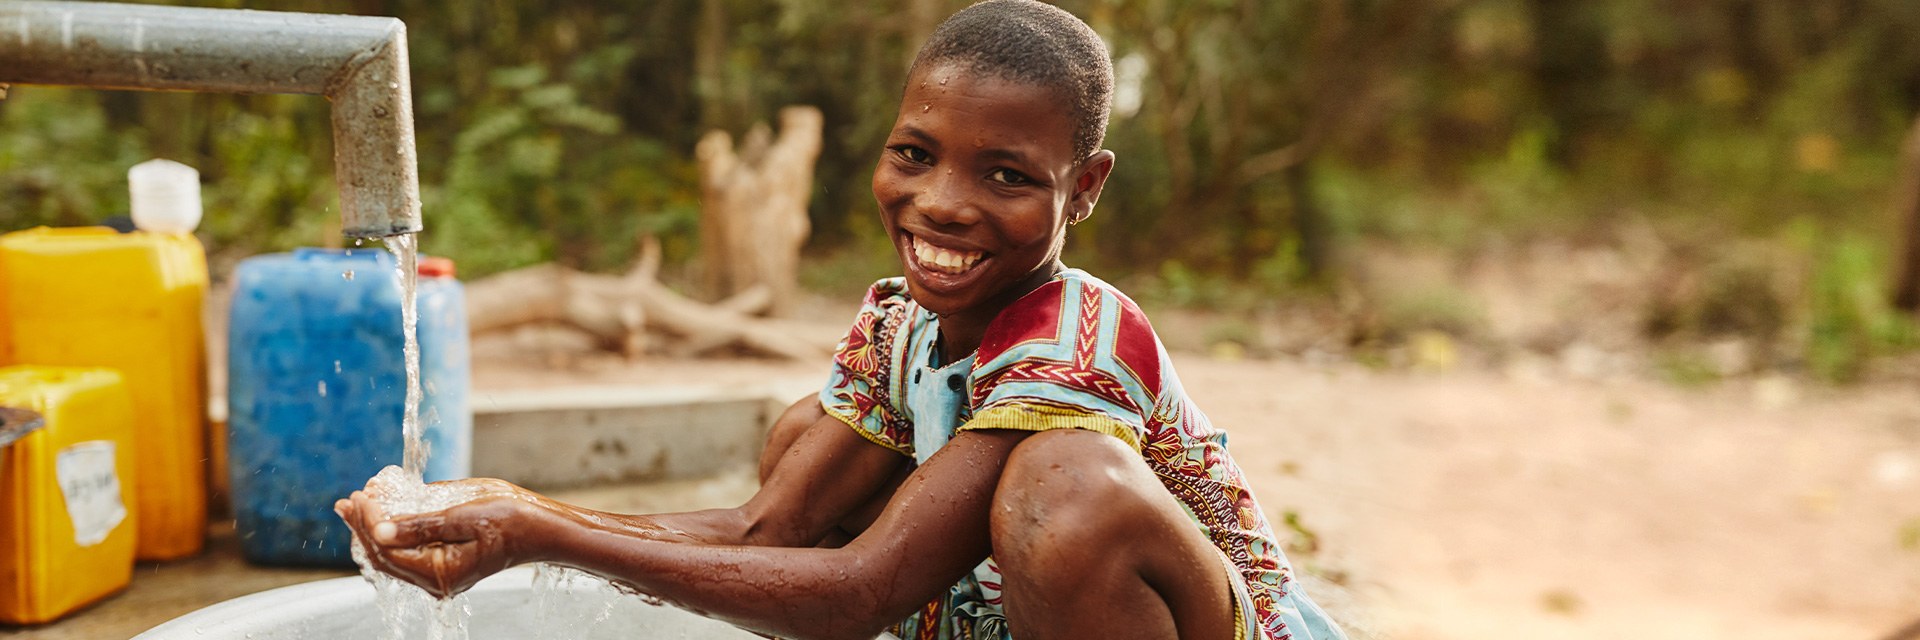 A boy smiles as he shows how he washes his hands in clean water.